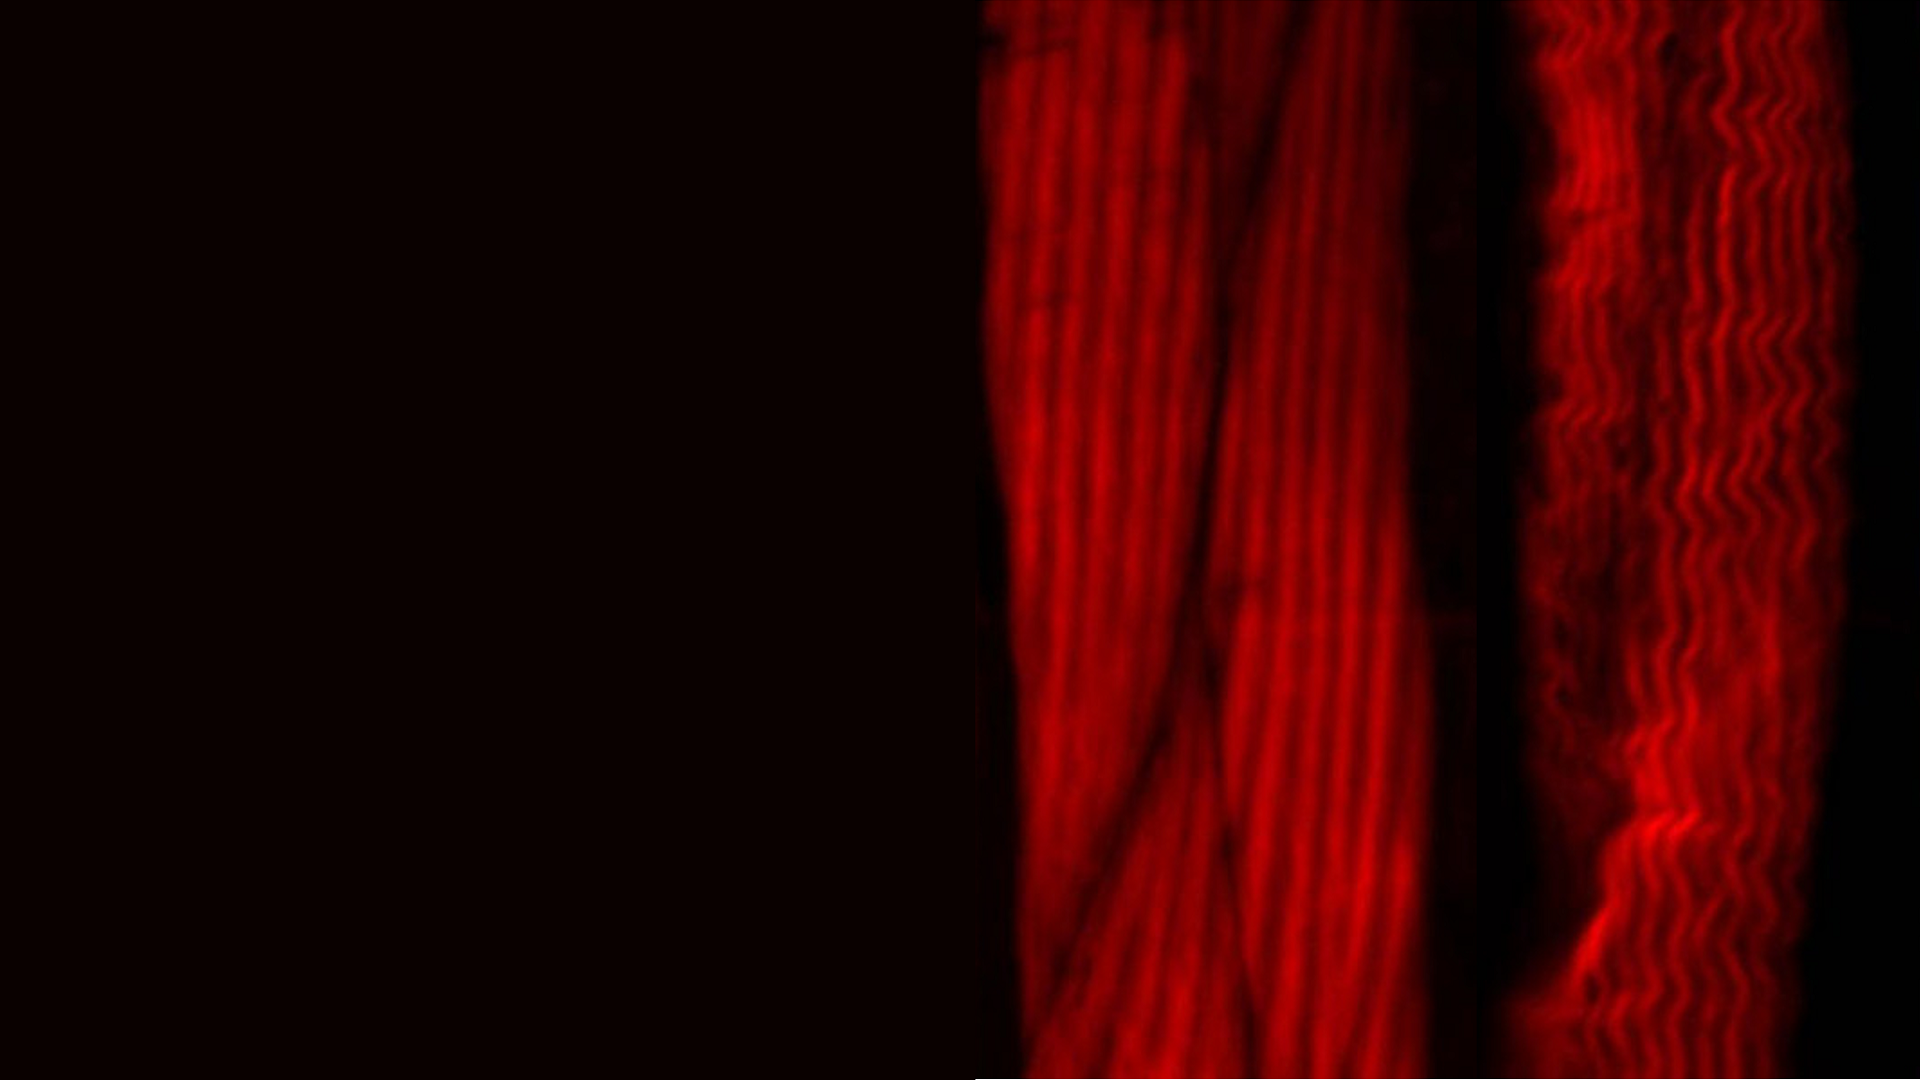 Researchers Use C. elegans and Stereo Zoom Microscopy to Study Aging and Age-Related Diseases